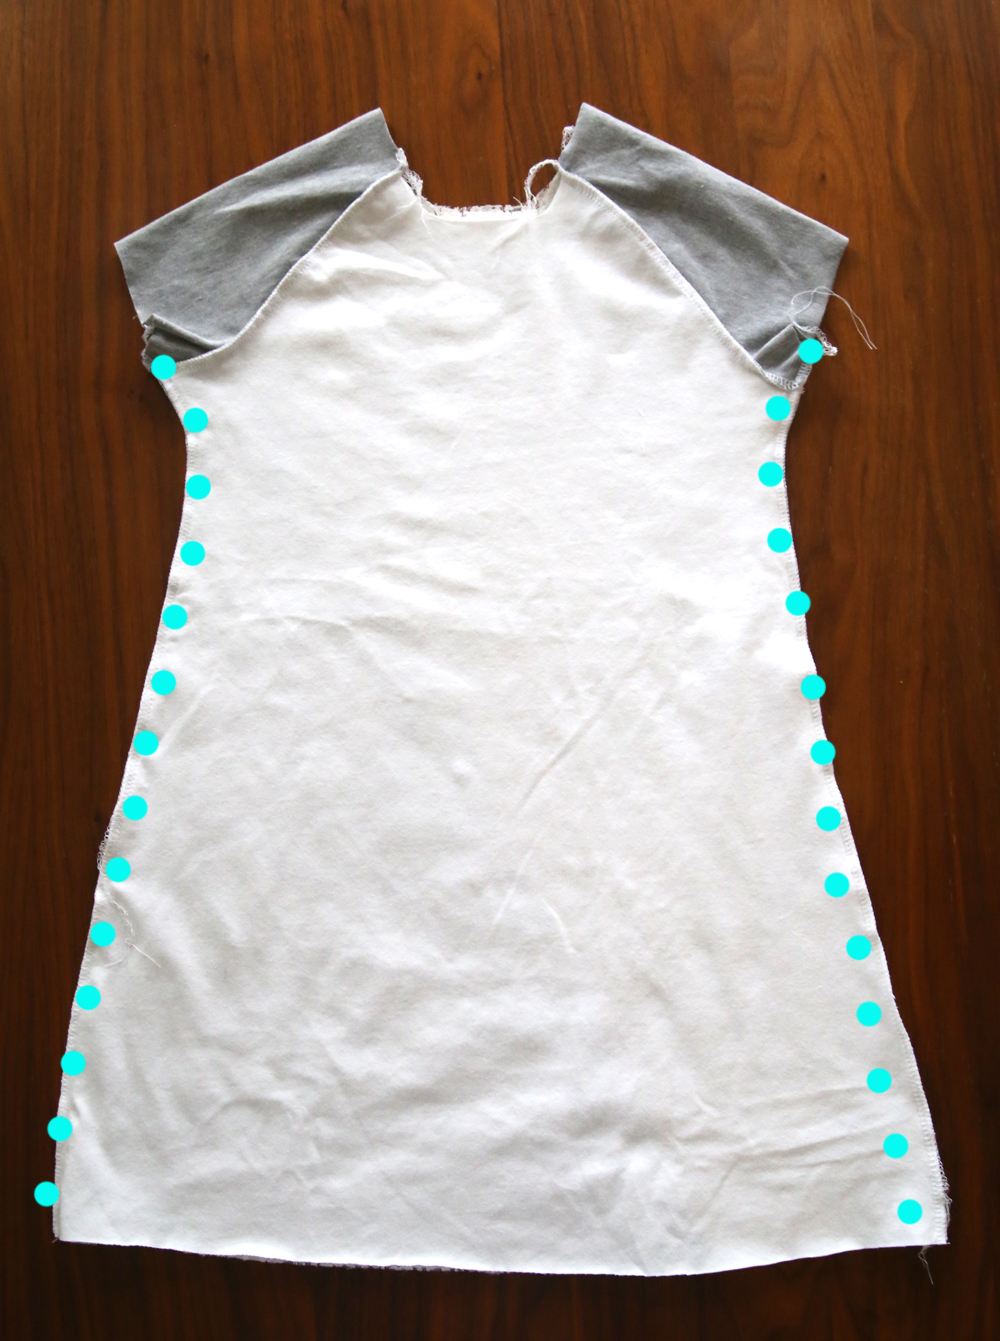 Raglan play dress inside out with side seams marked